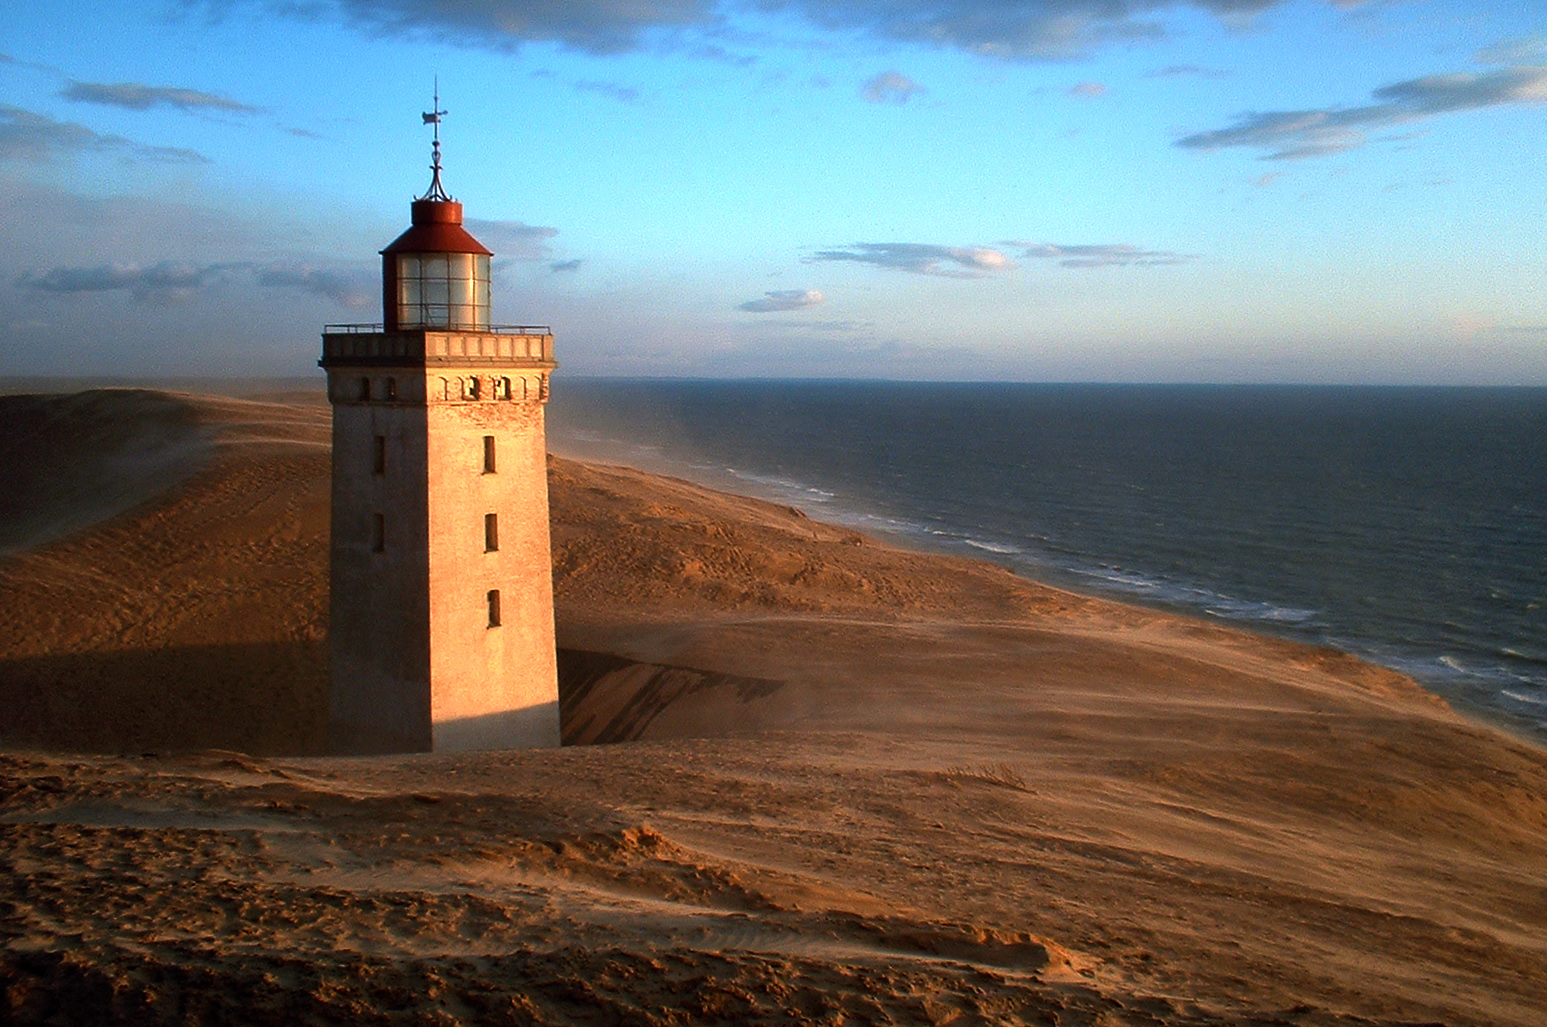 A light house standing in a sand dune is being illuminated by a setting sun.